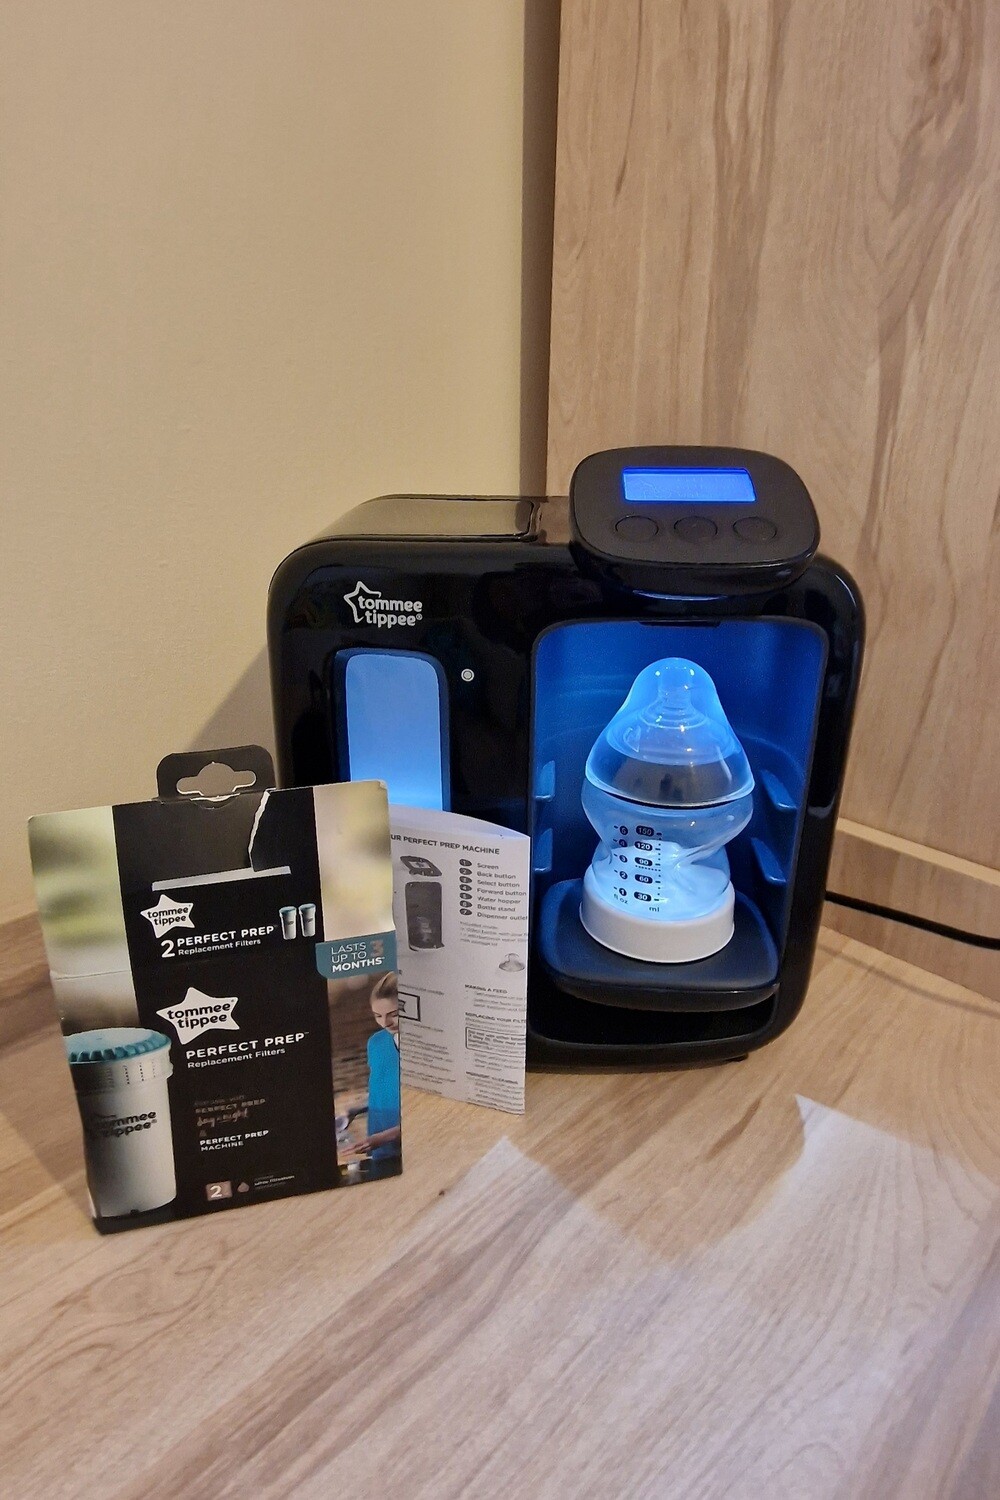 Tomme Tippee Day and Night prep machine